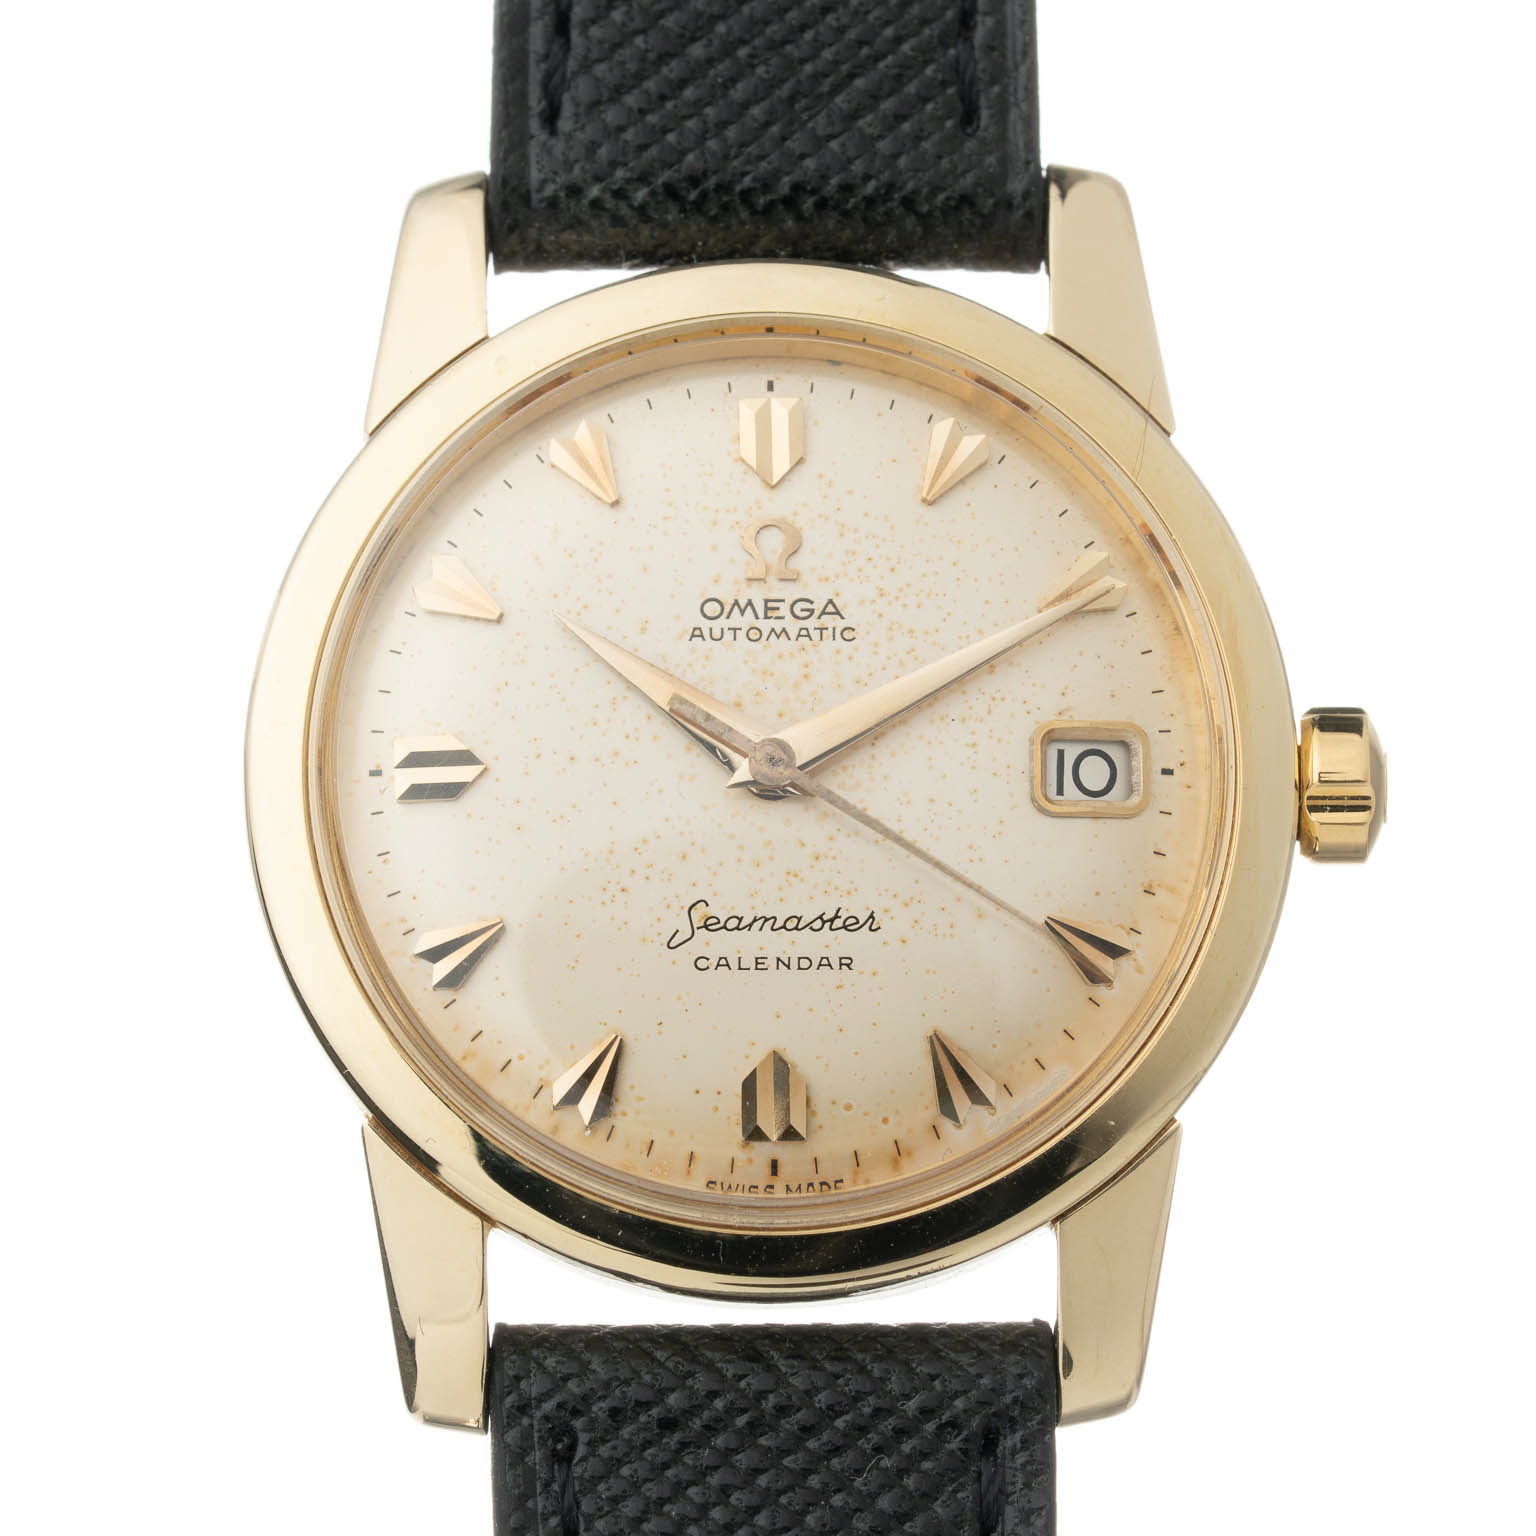 Vintage Omega Seamaster 14k Solid Gold with beefy lugs 2849-1 from 1959